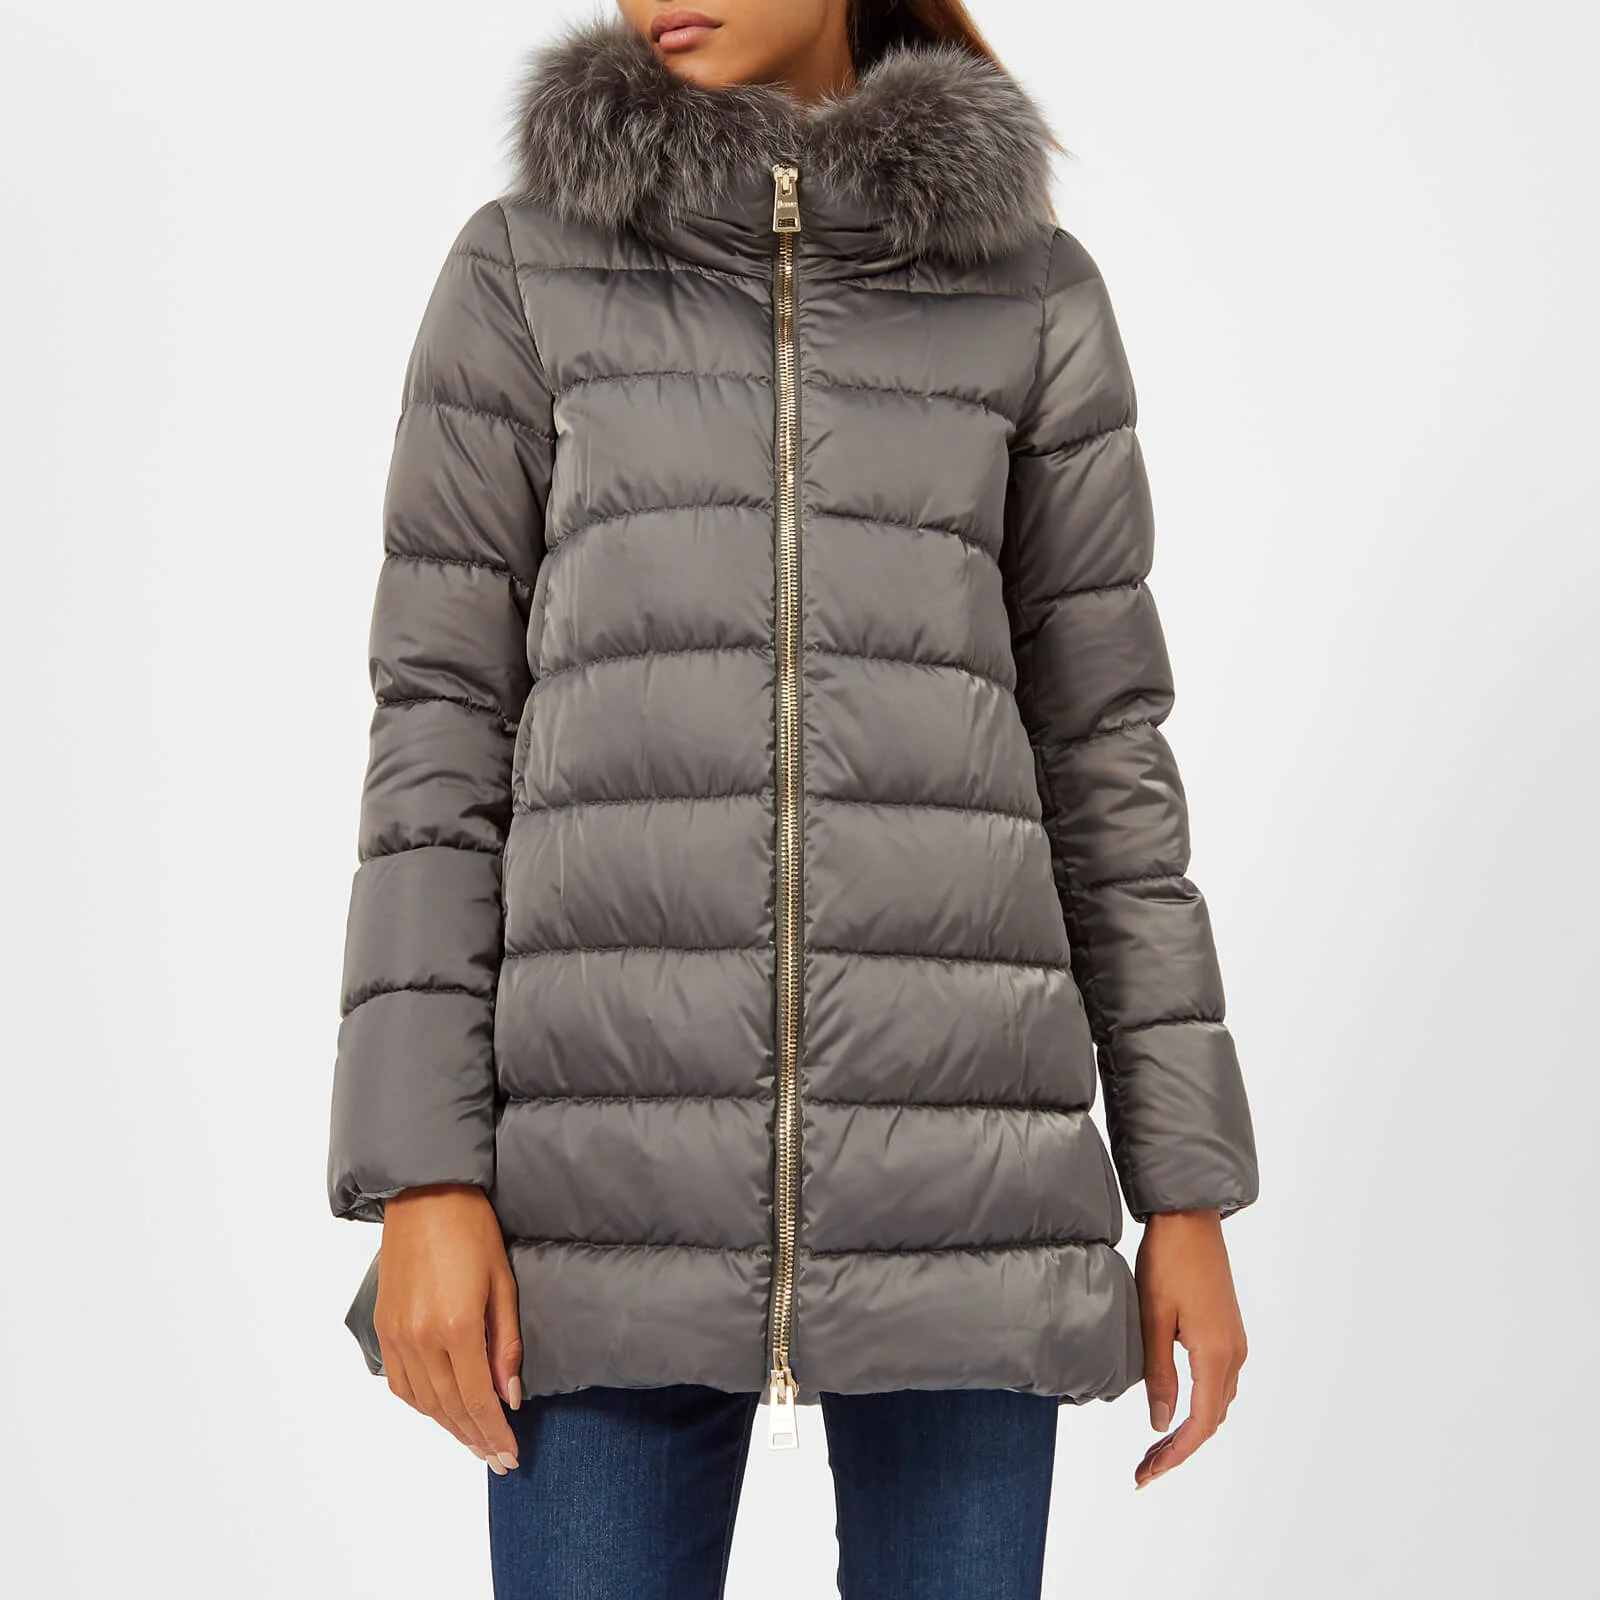 Herno Women's Down Padded Coat with Fur Collar - Grey Image 1